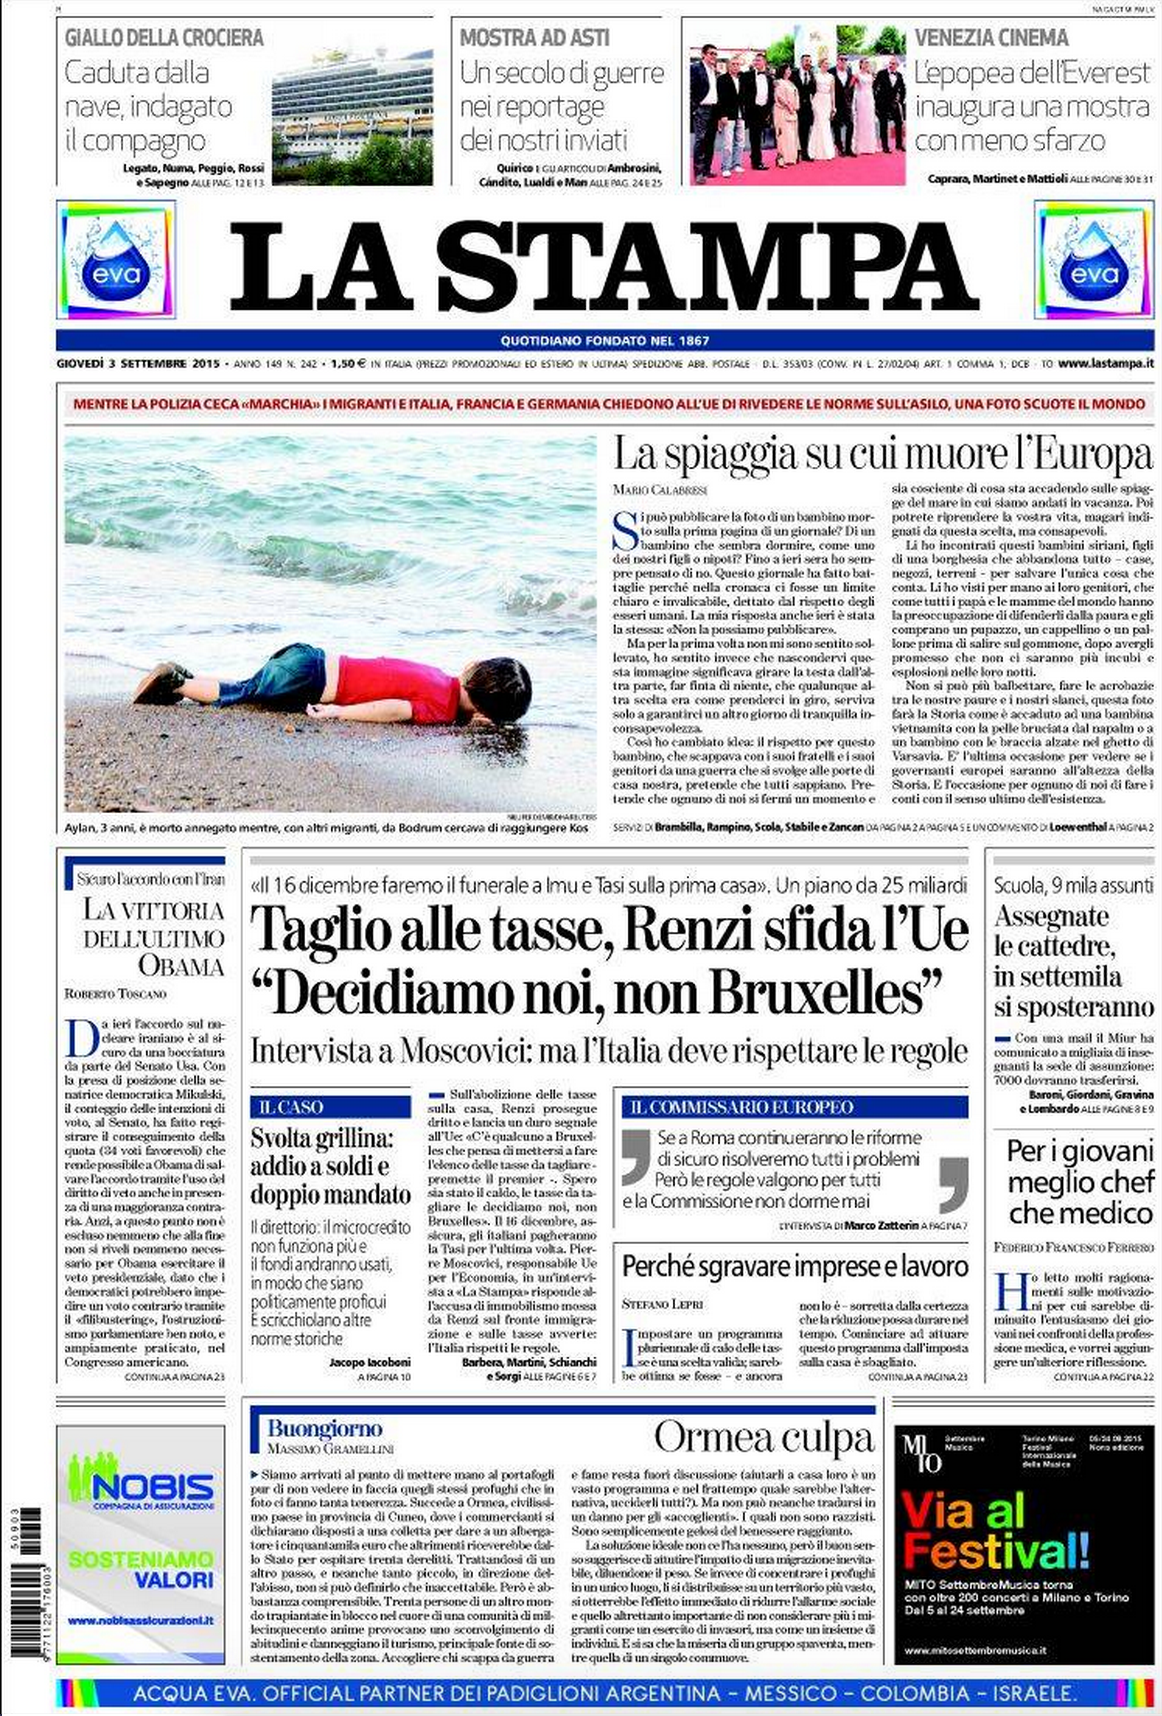 Drowned Migrant Boy La Stampa front page